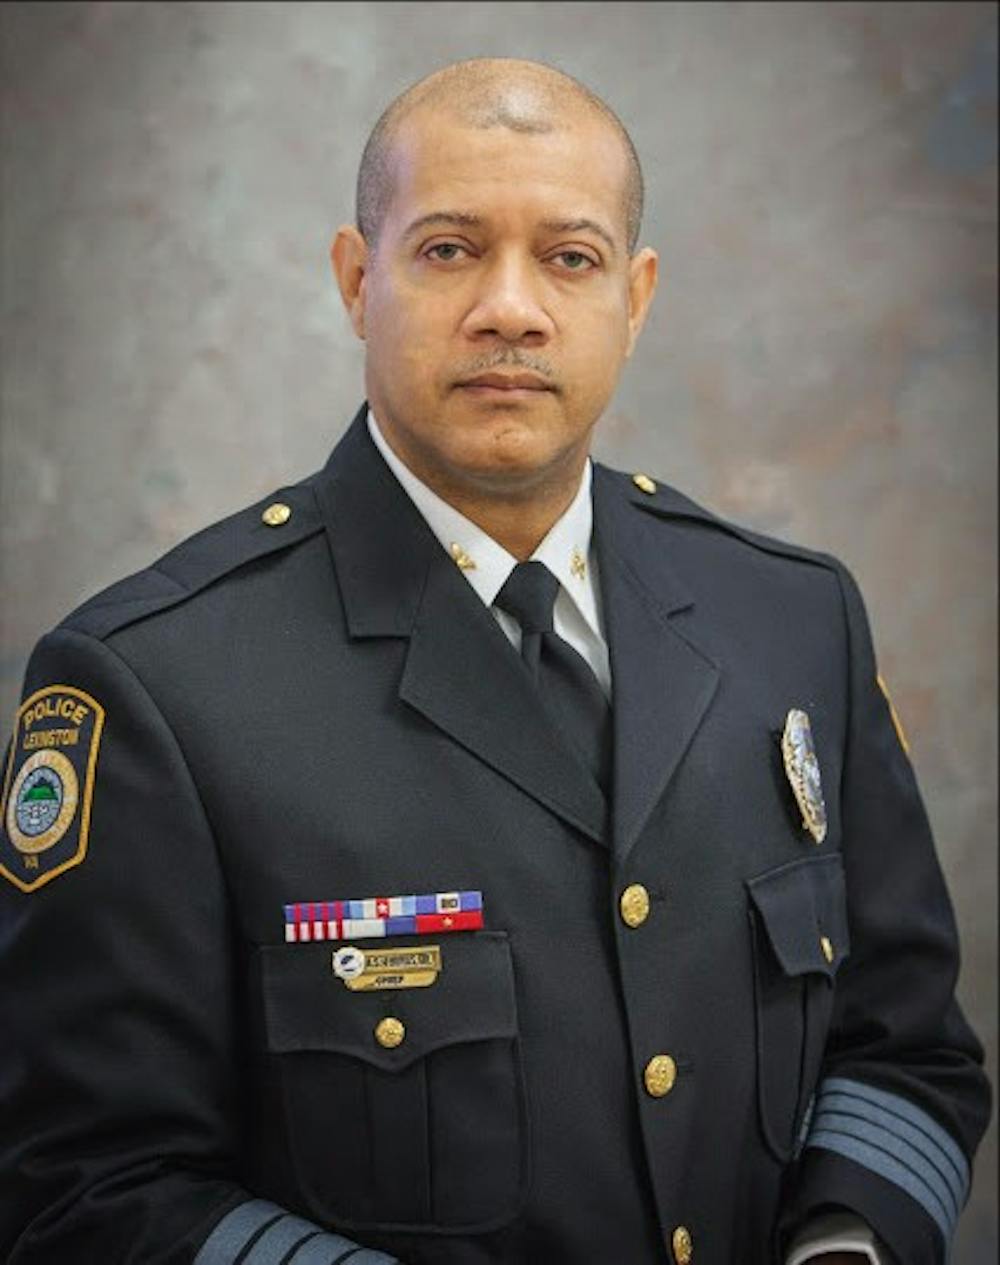 Thomas has served as the chief of police in Lexington, Va., since 2010. As chief, he orchestrated numerous initiatives in the city including operational reorganization, updates to emergency communication systems, expanded outreach to city youth and a junior police academy.